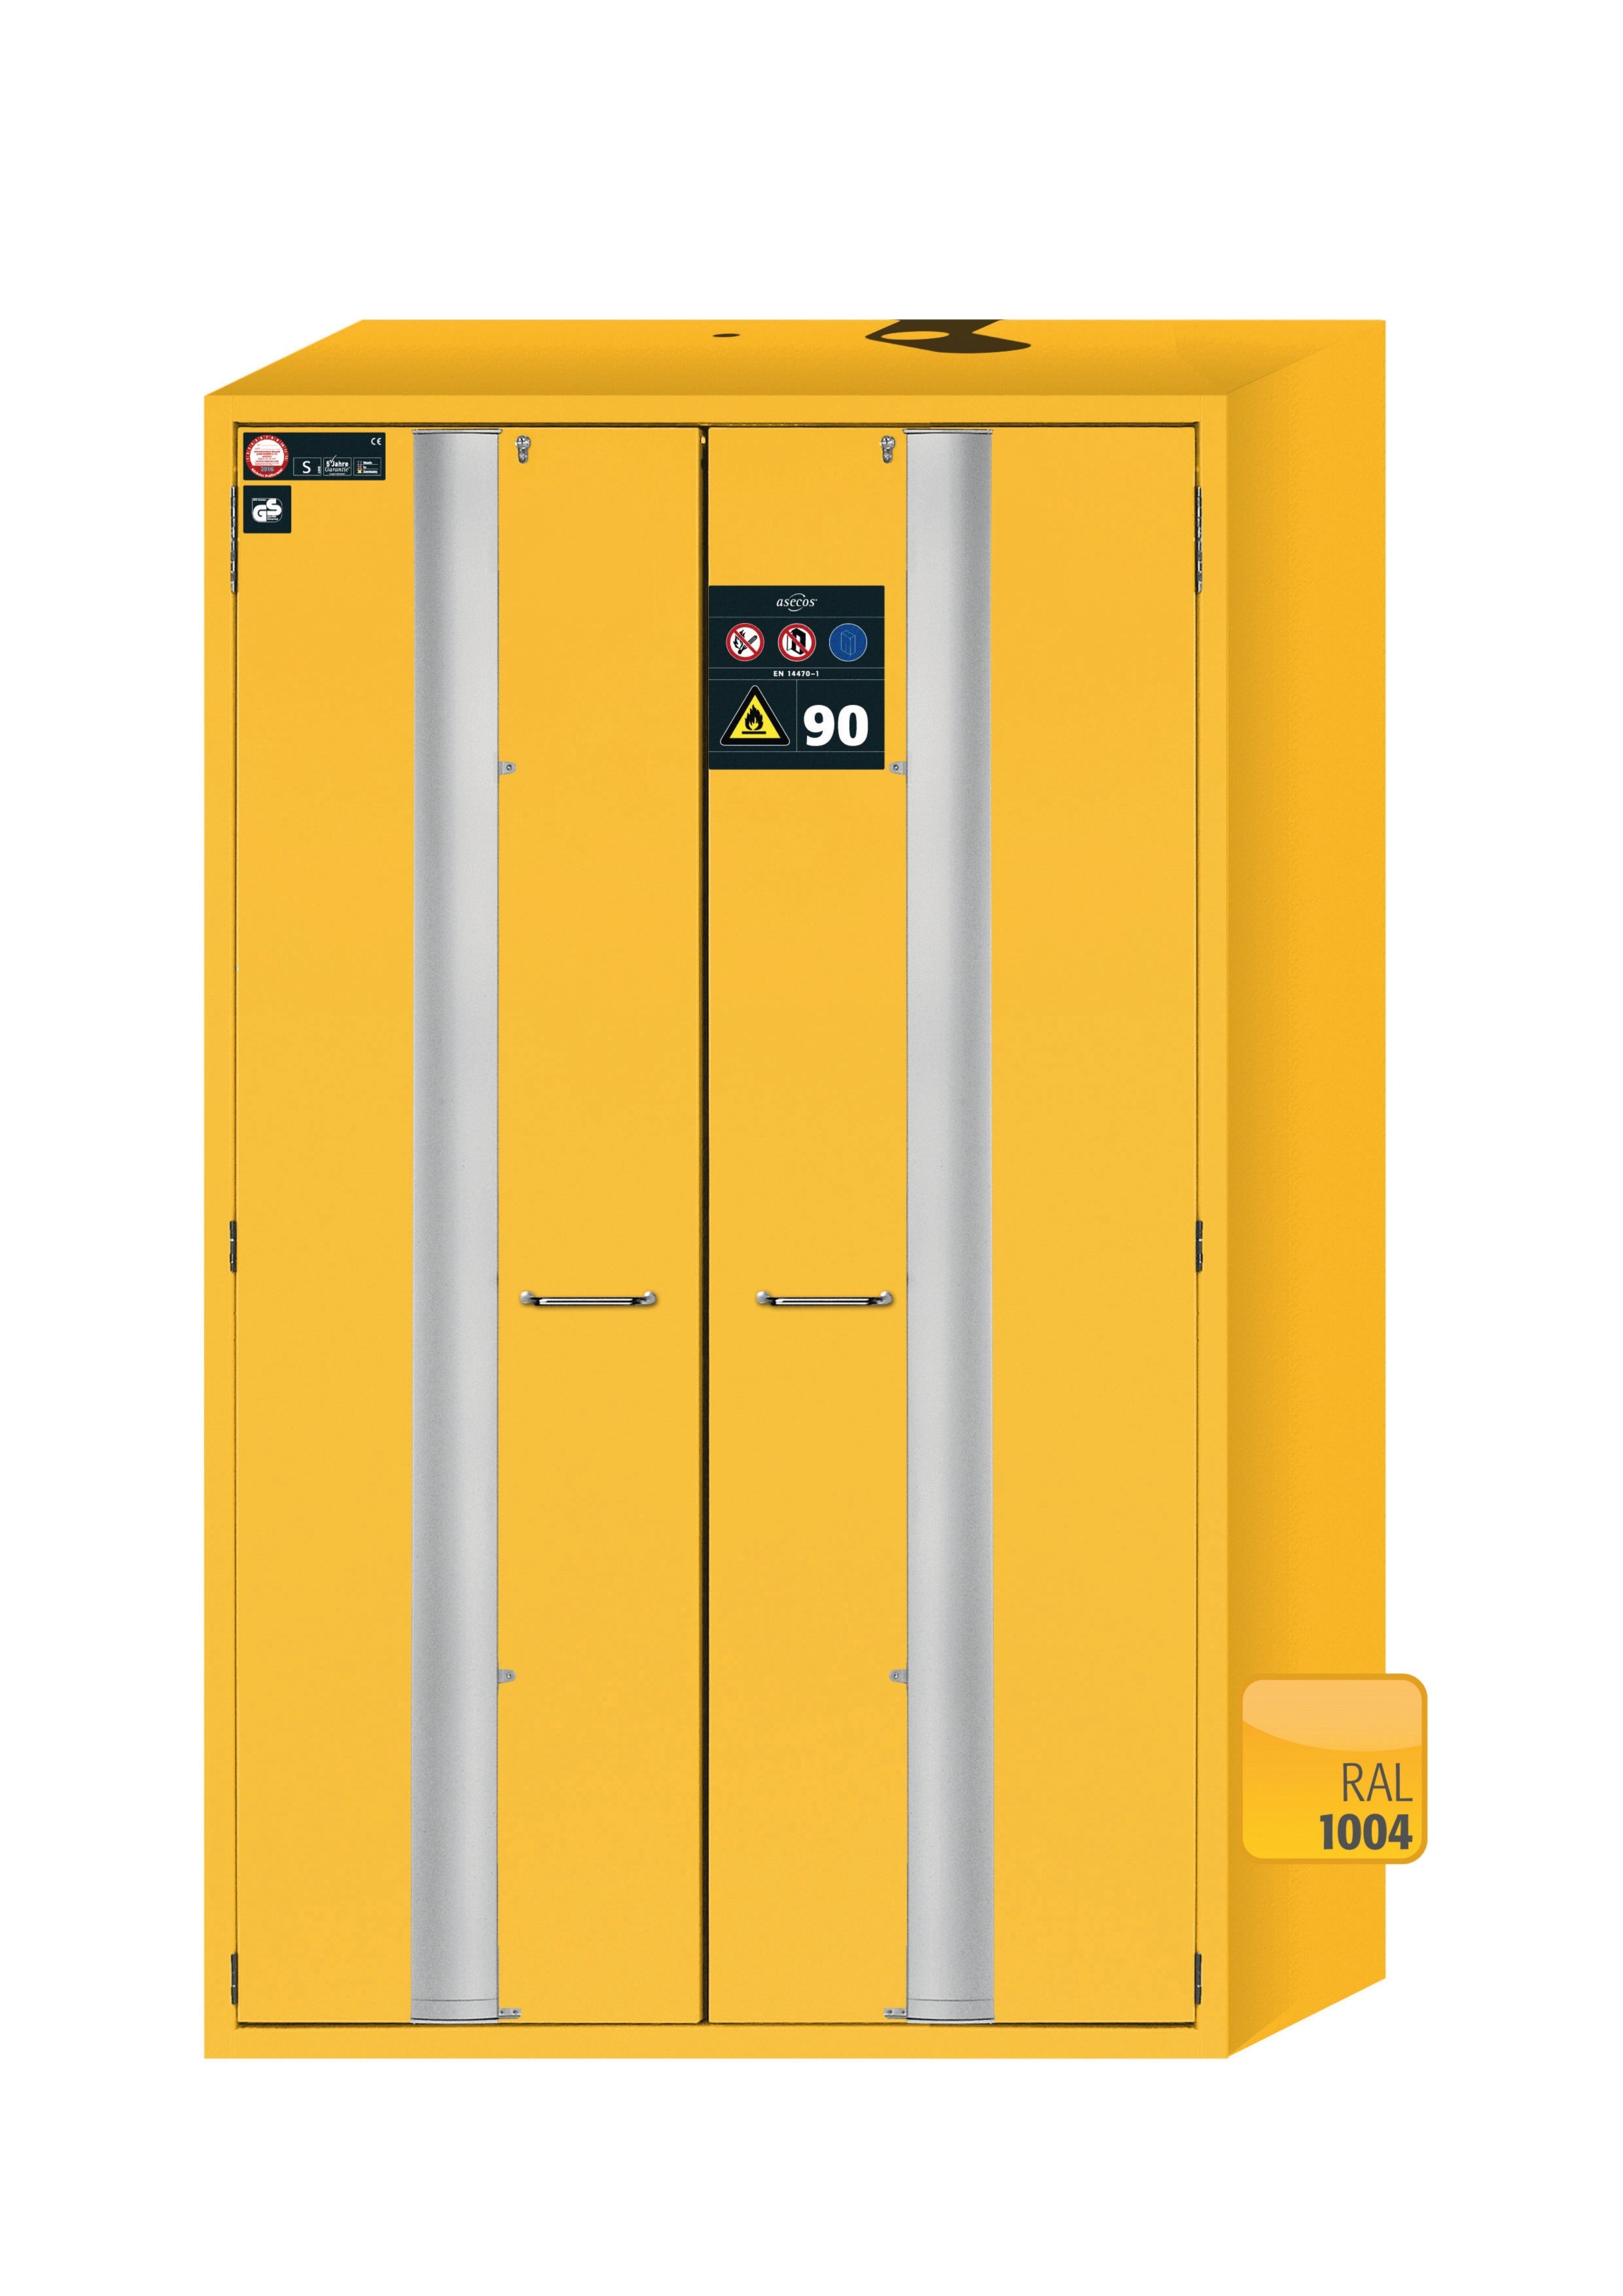 Type 90 safety storage cabinet S-PHOENIX-90 model S90.196.120.FDAS in warning yellow RAL 1004 with 2x drawer (standard) (sheet steel),